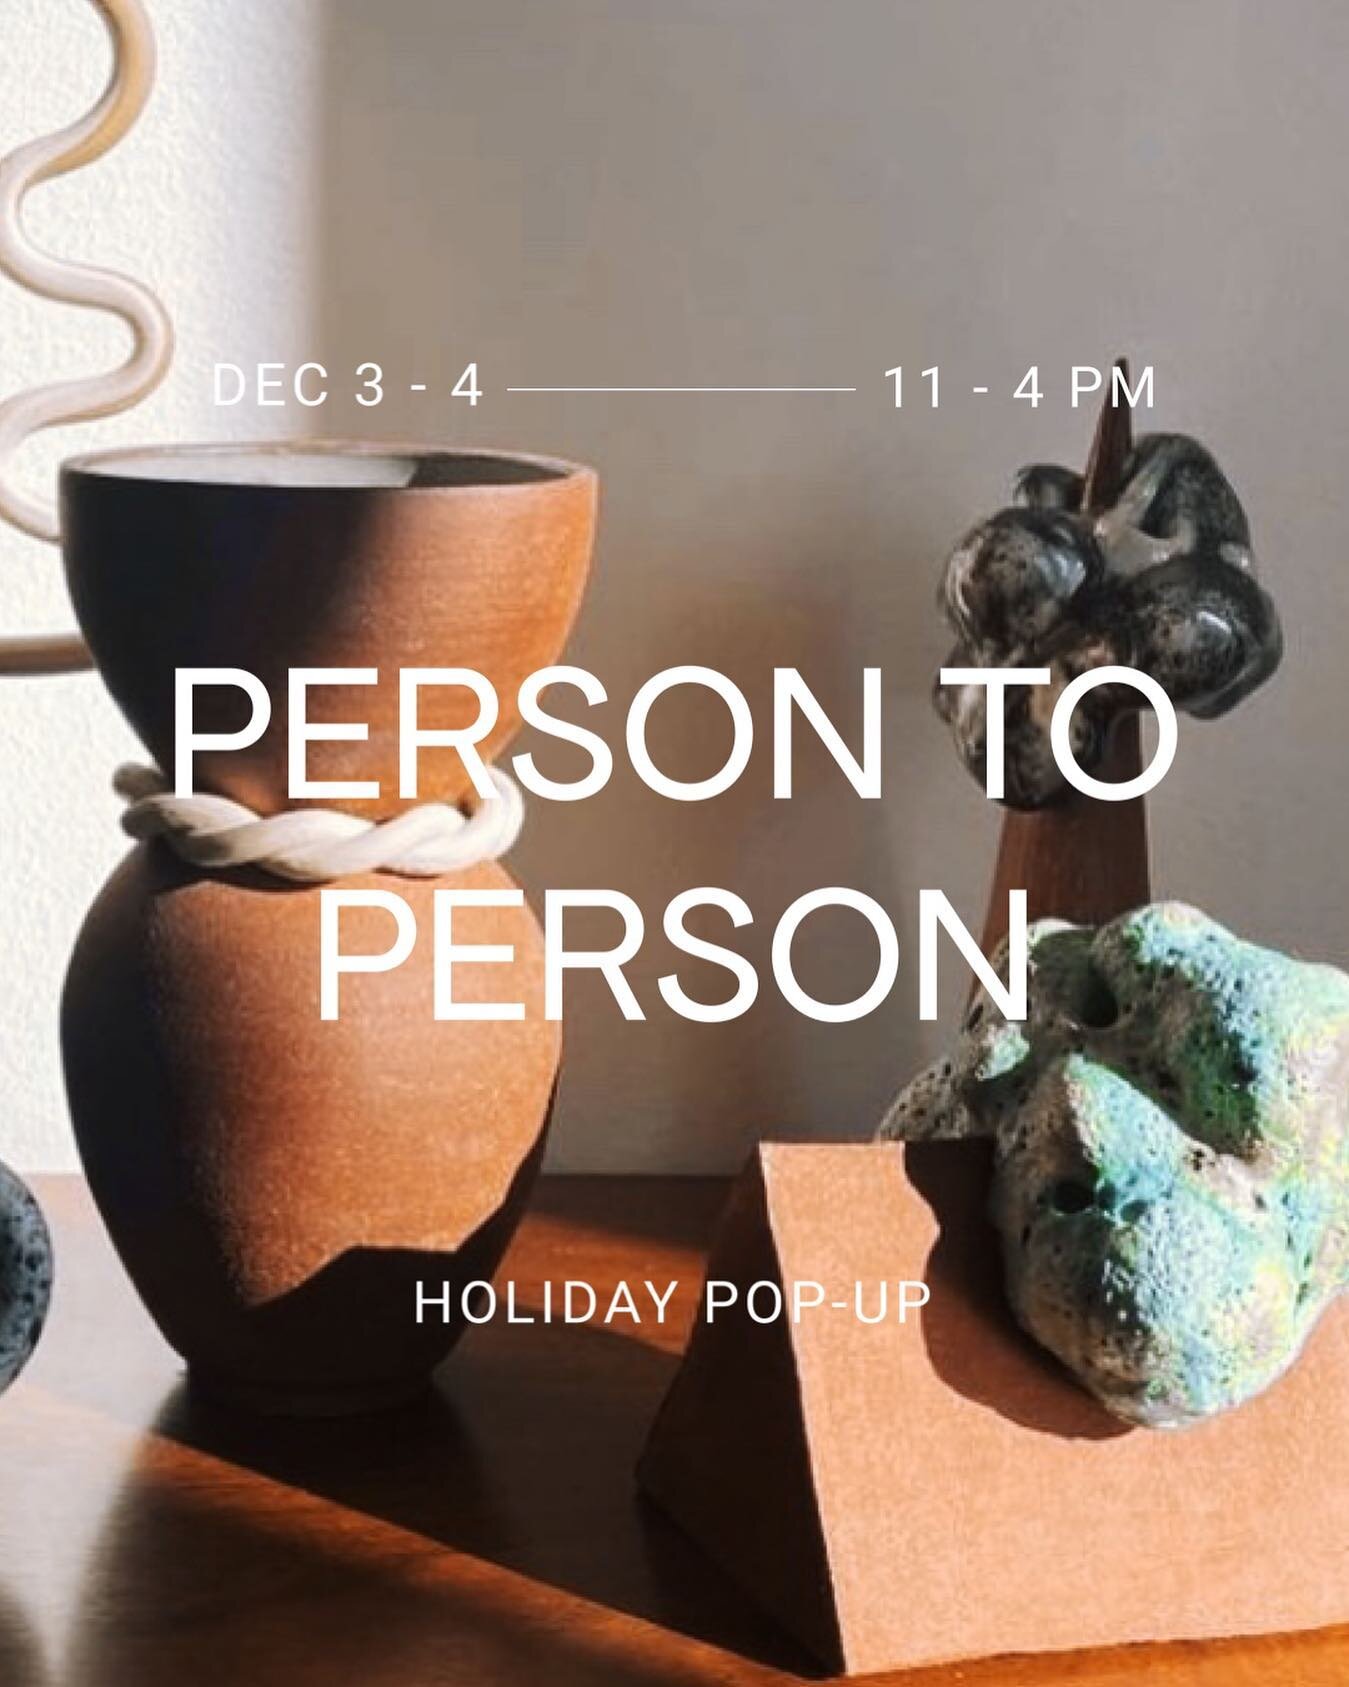 It&rsquo;s December, which means our holiday popups are back! Last year, we invited our vintage reseller friends to help you with your holiday shopping. This year, we have a group of cool local makers joining us at the shop starting with @inpersonstu